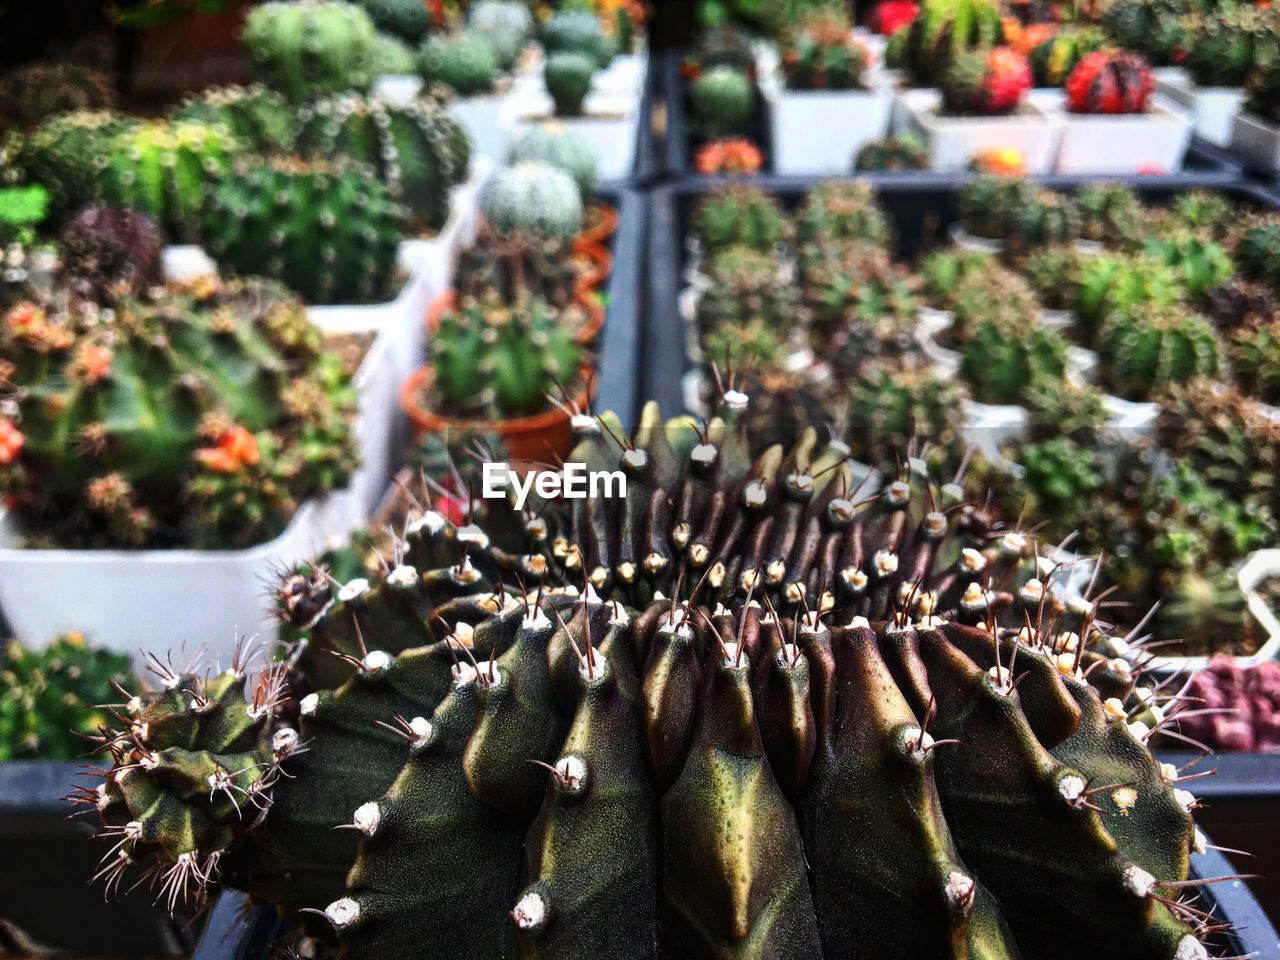 plant, flower, nature, no people, day, freshness, succulent plant, growth, food and drink, cactus, garden, food, outdoors, large group of objects, focus on foreground, beauty in nature, abundance, flowering plant, market, arrangement, close-up, healthy eating, retail